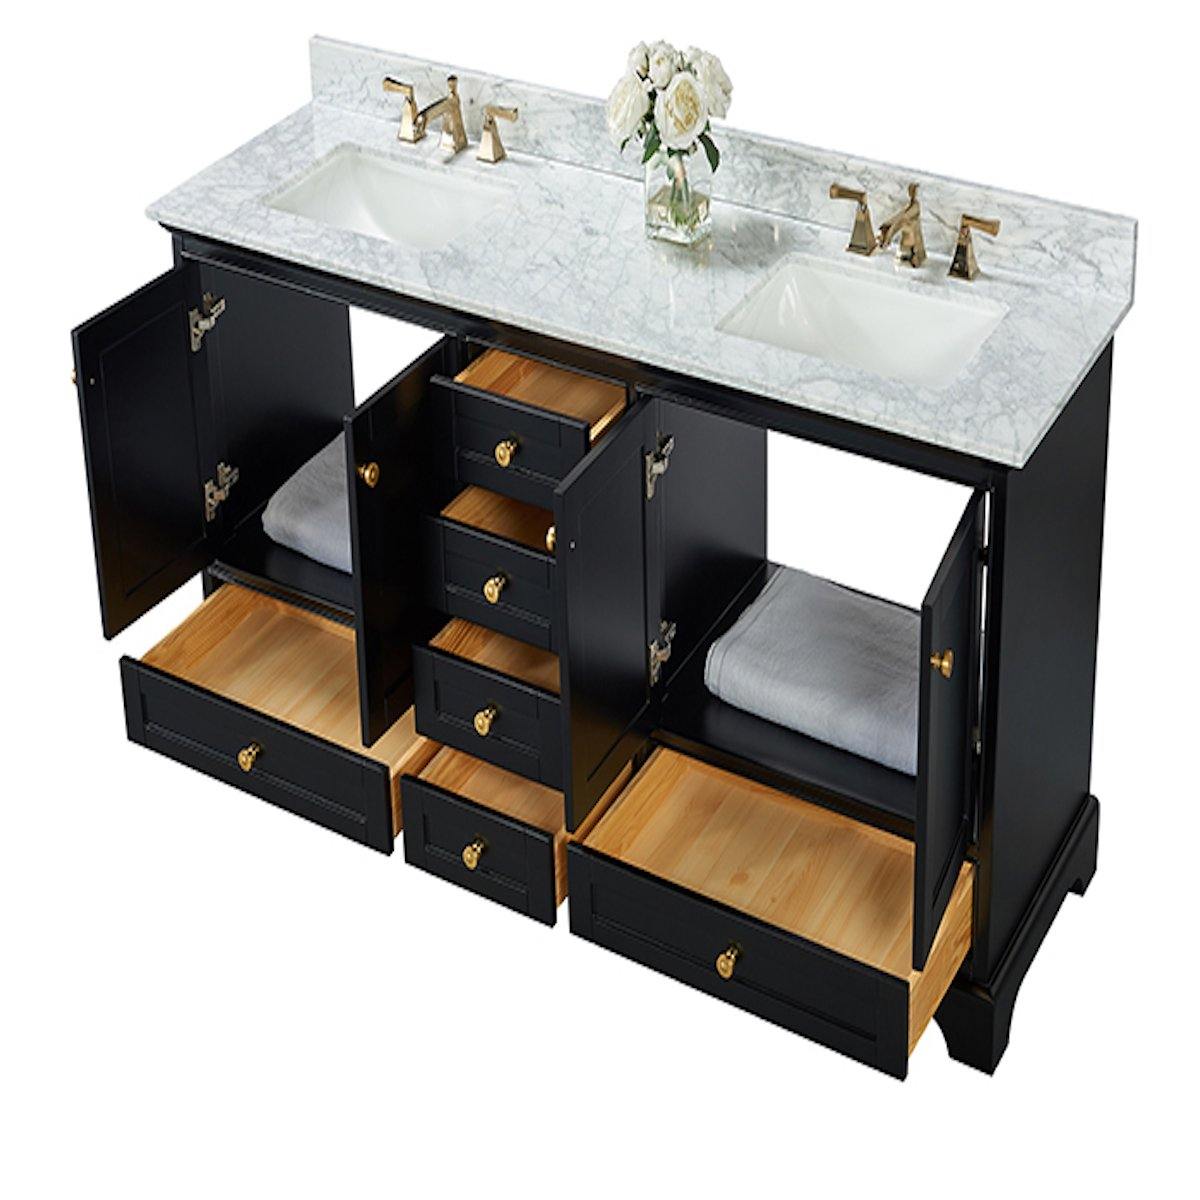 Ancerre Designs Audrey 72 Inch Onyx Black Double Vanity Inside Side View